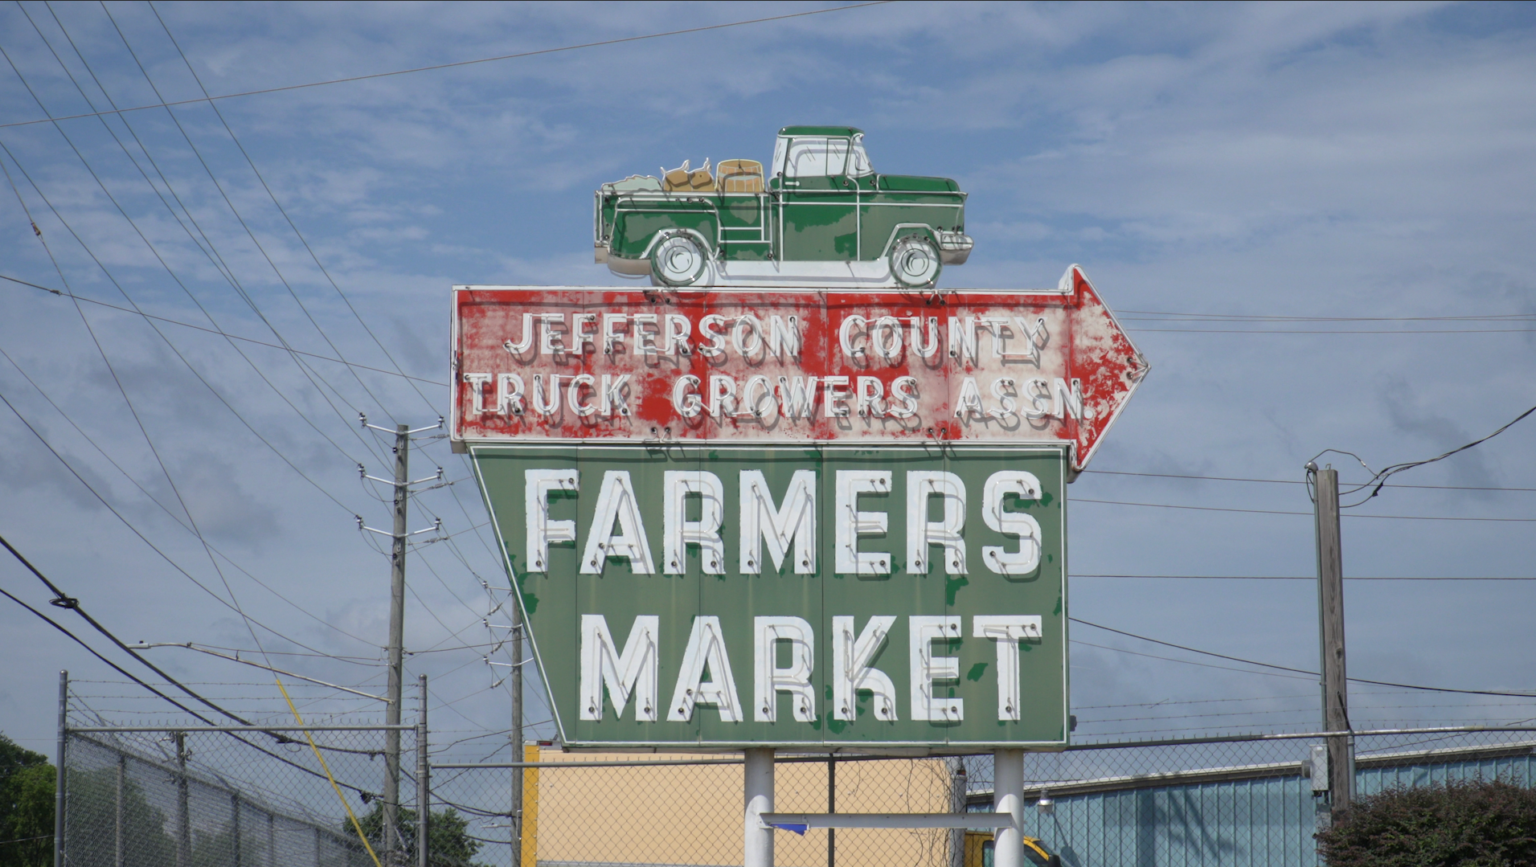 Historic Market Looks For Bright Future During Difficult Days  Alabama